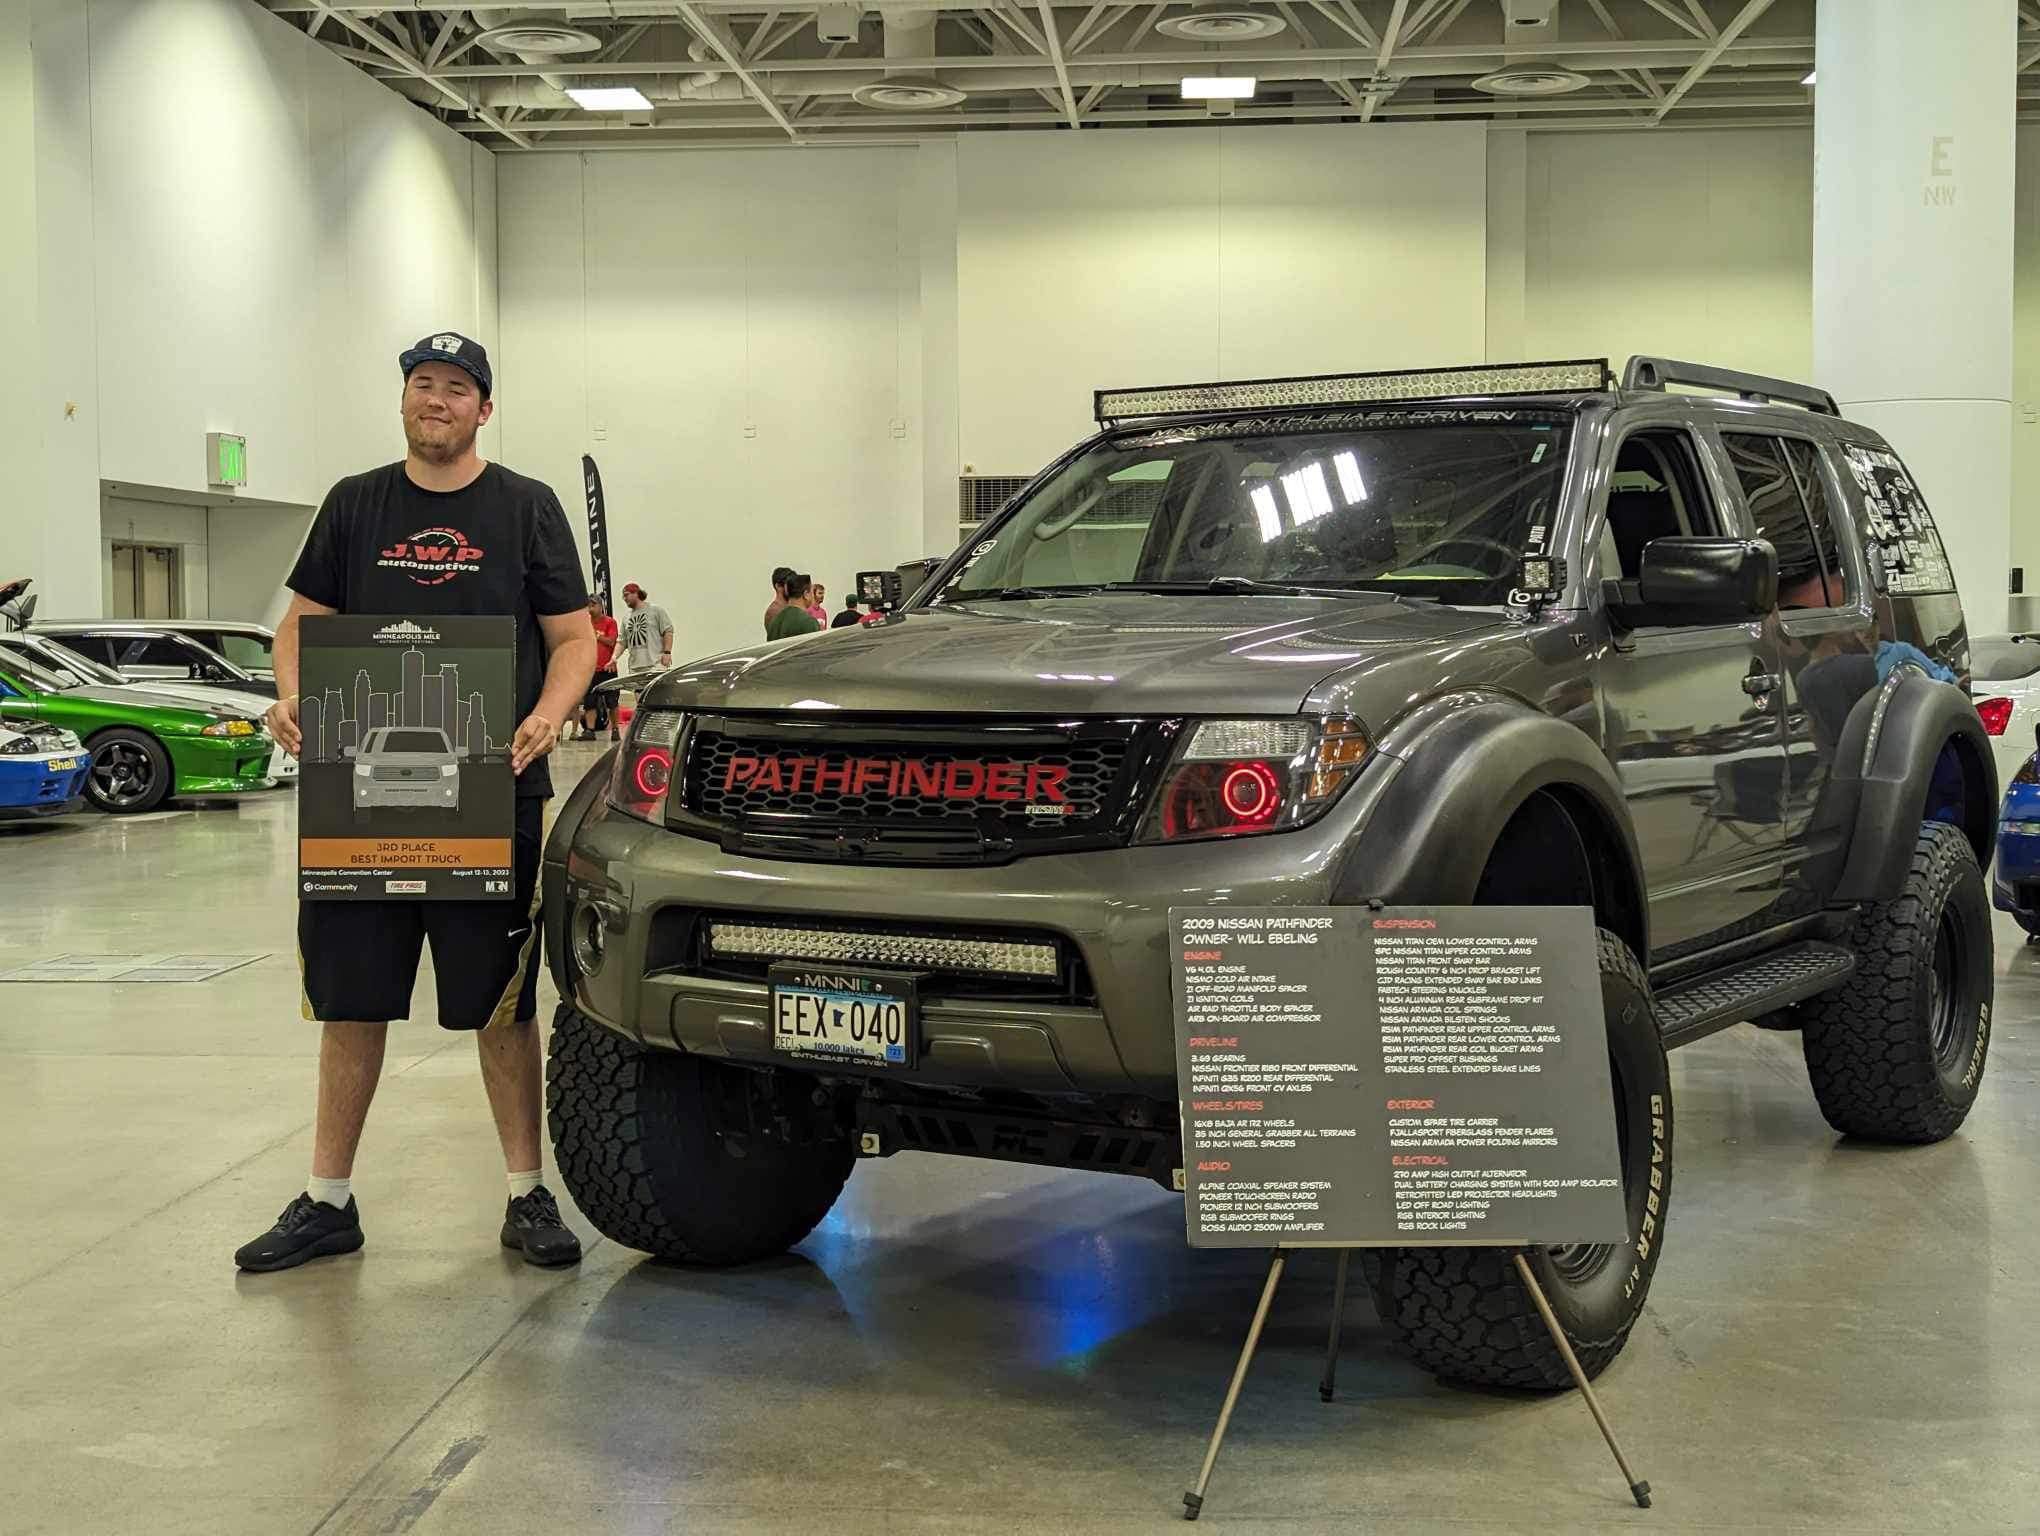 IMPORT TRUCK - 3RD PLACE